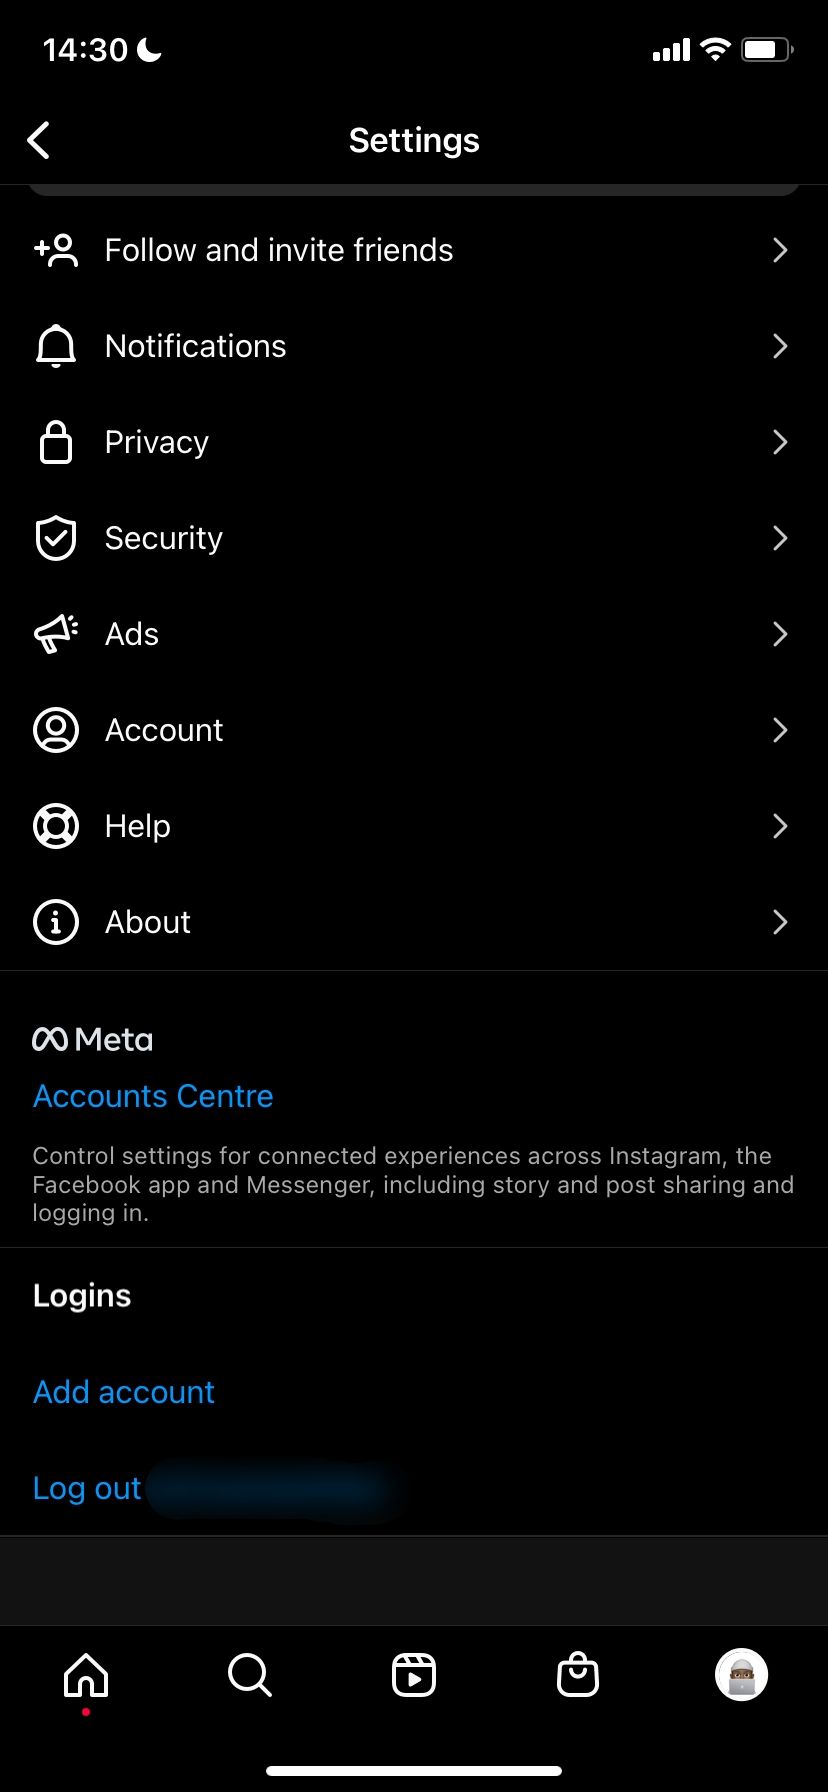 Instagram settings page on mobile